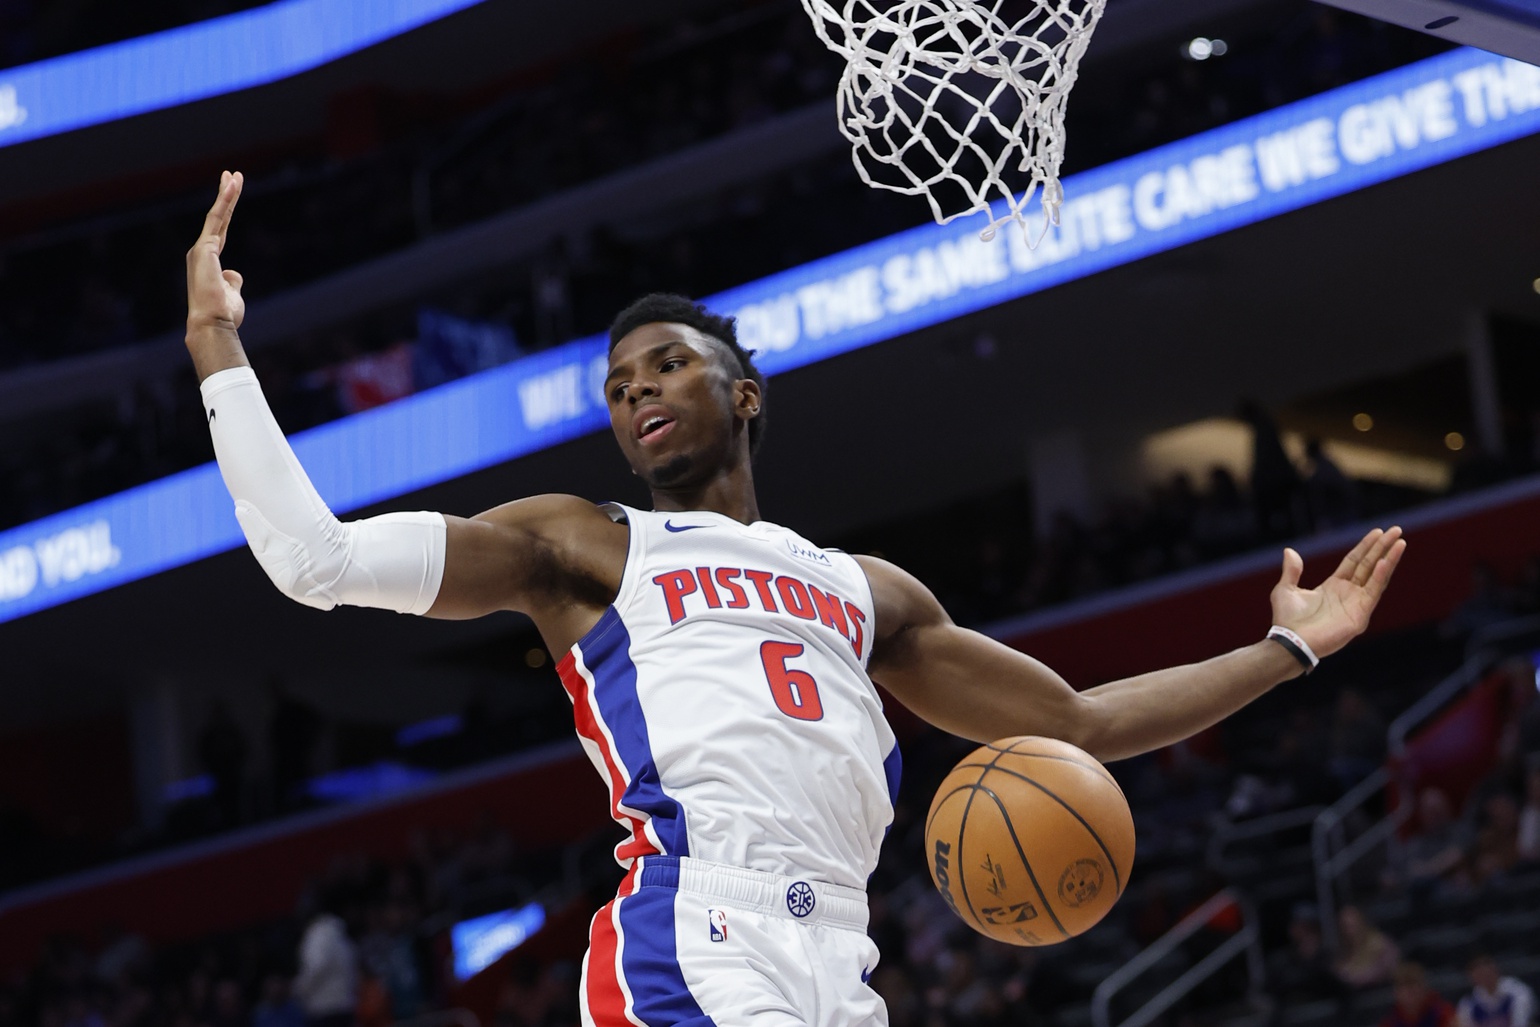 Mar 1, 2023; Detroit, Michigan, USA; Detroit Pistons guard Hamidou Diallo (6) dunks in the first half against the Chicago Bulls at Little Caesars Arena. Mandatory Credit: Rick Osentoski-USA TODAY Sports